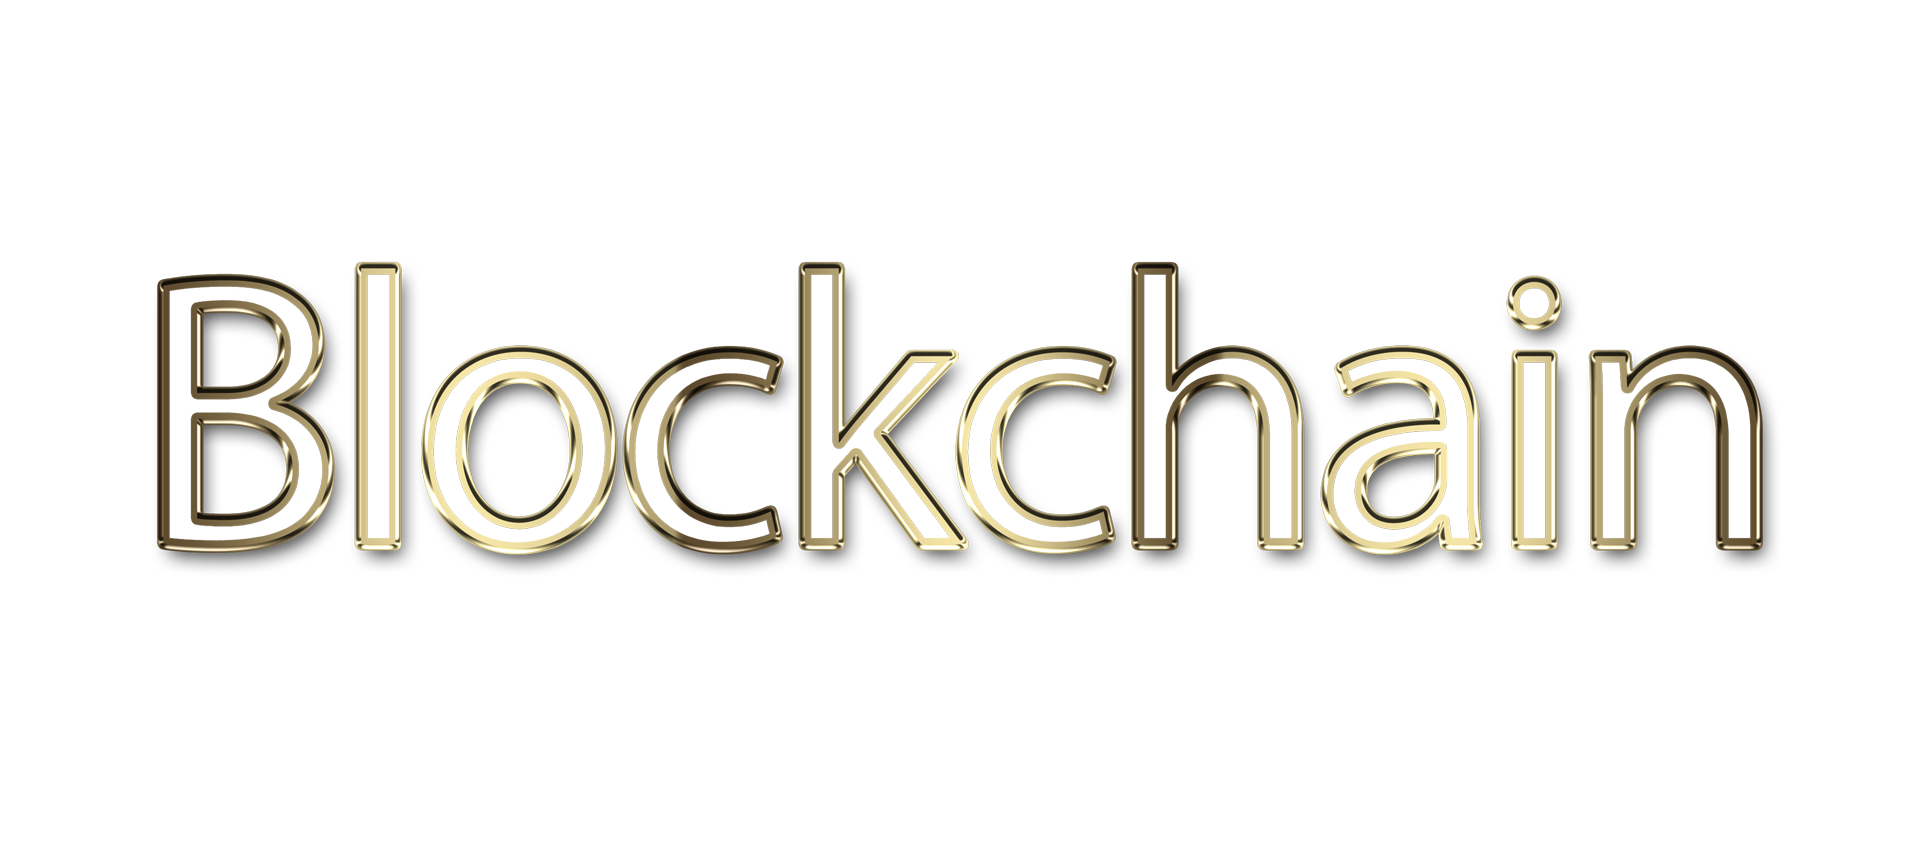 Blockchain png, word Blockchain png, Blockchain word png, Blockchain text png, Blockchain letters png, Blockchain word art typography PNG images, transparent png